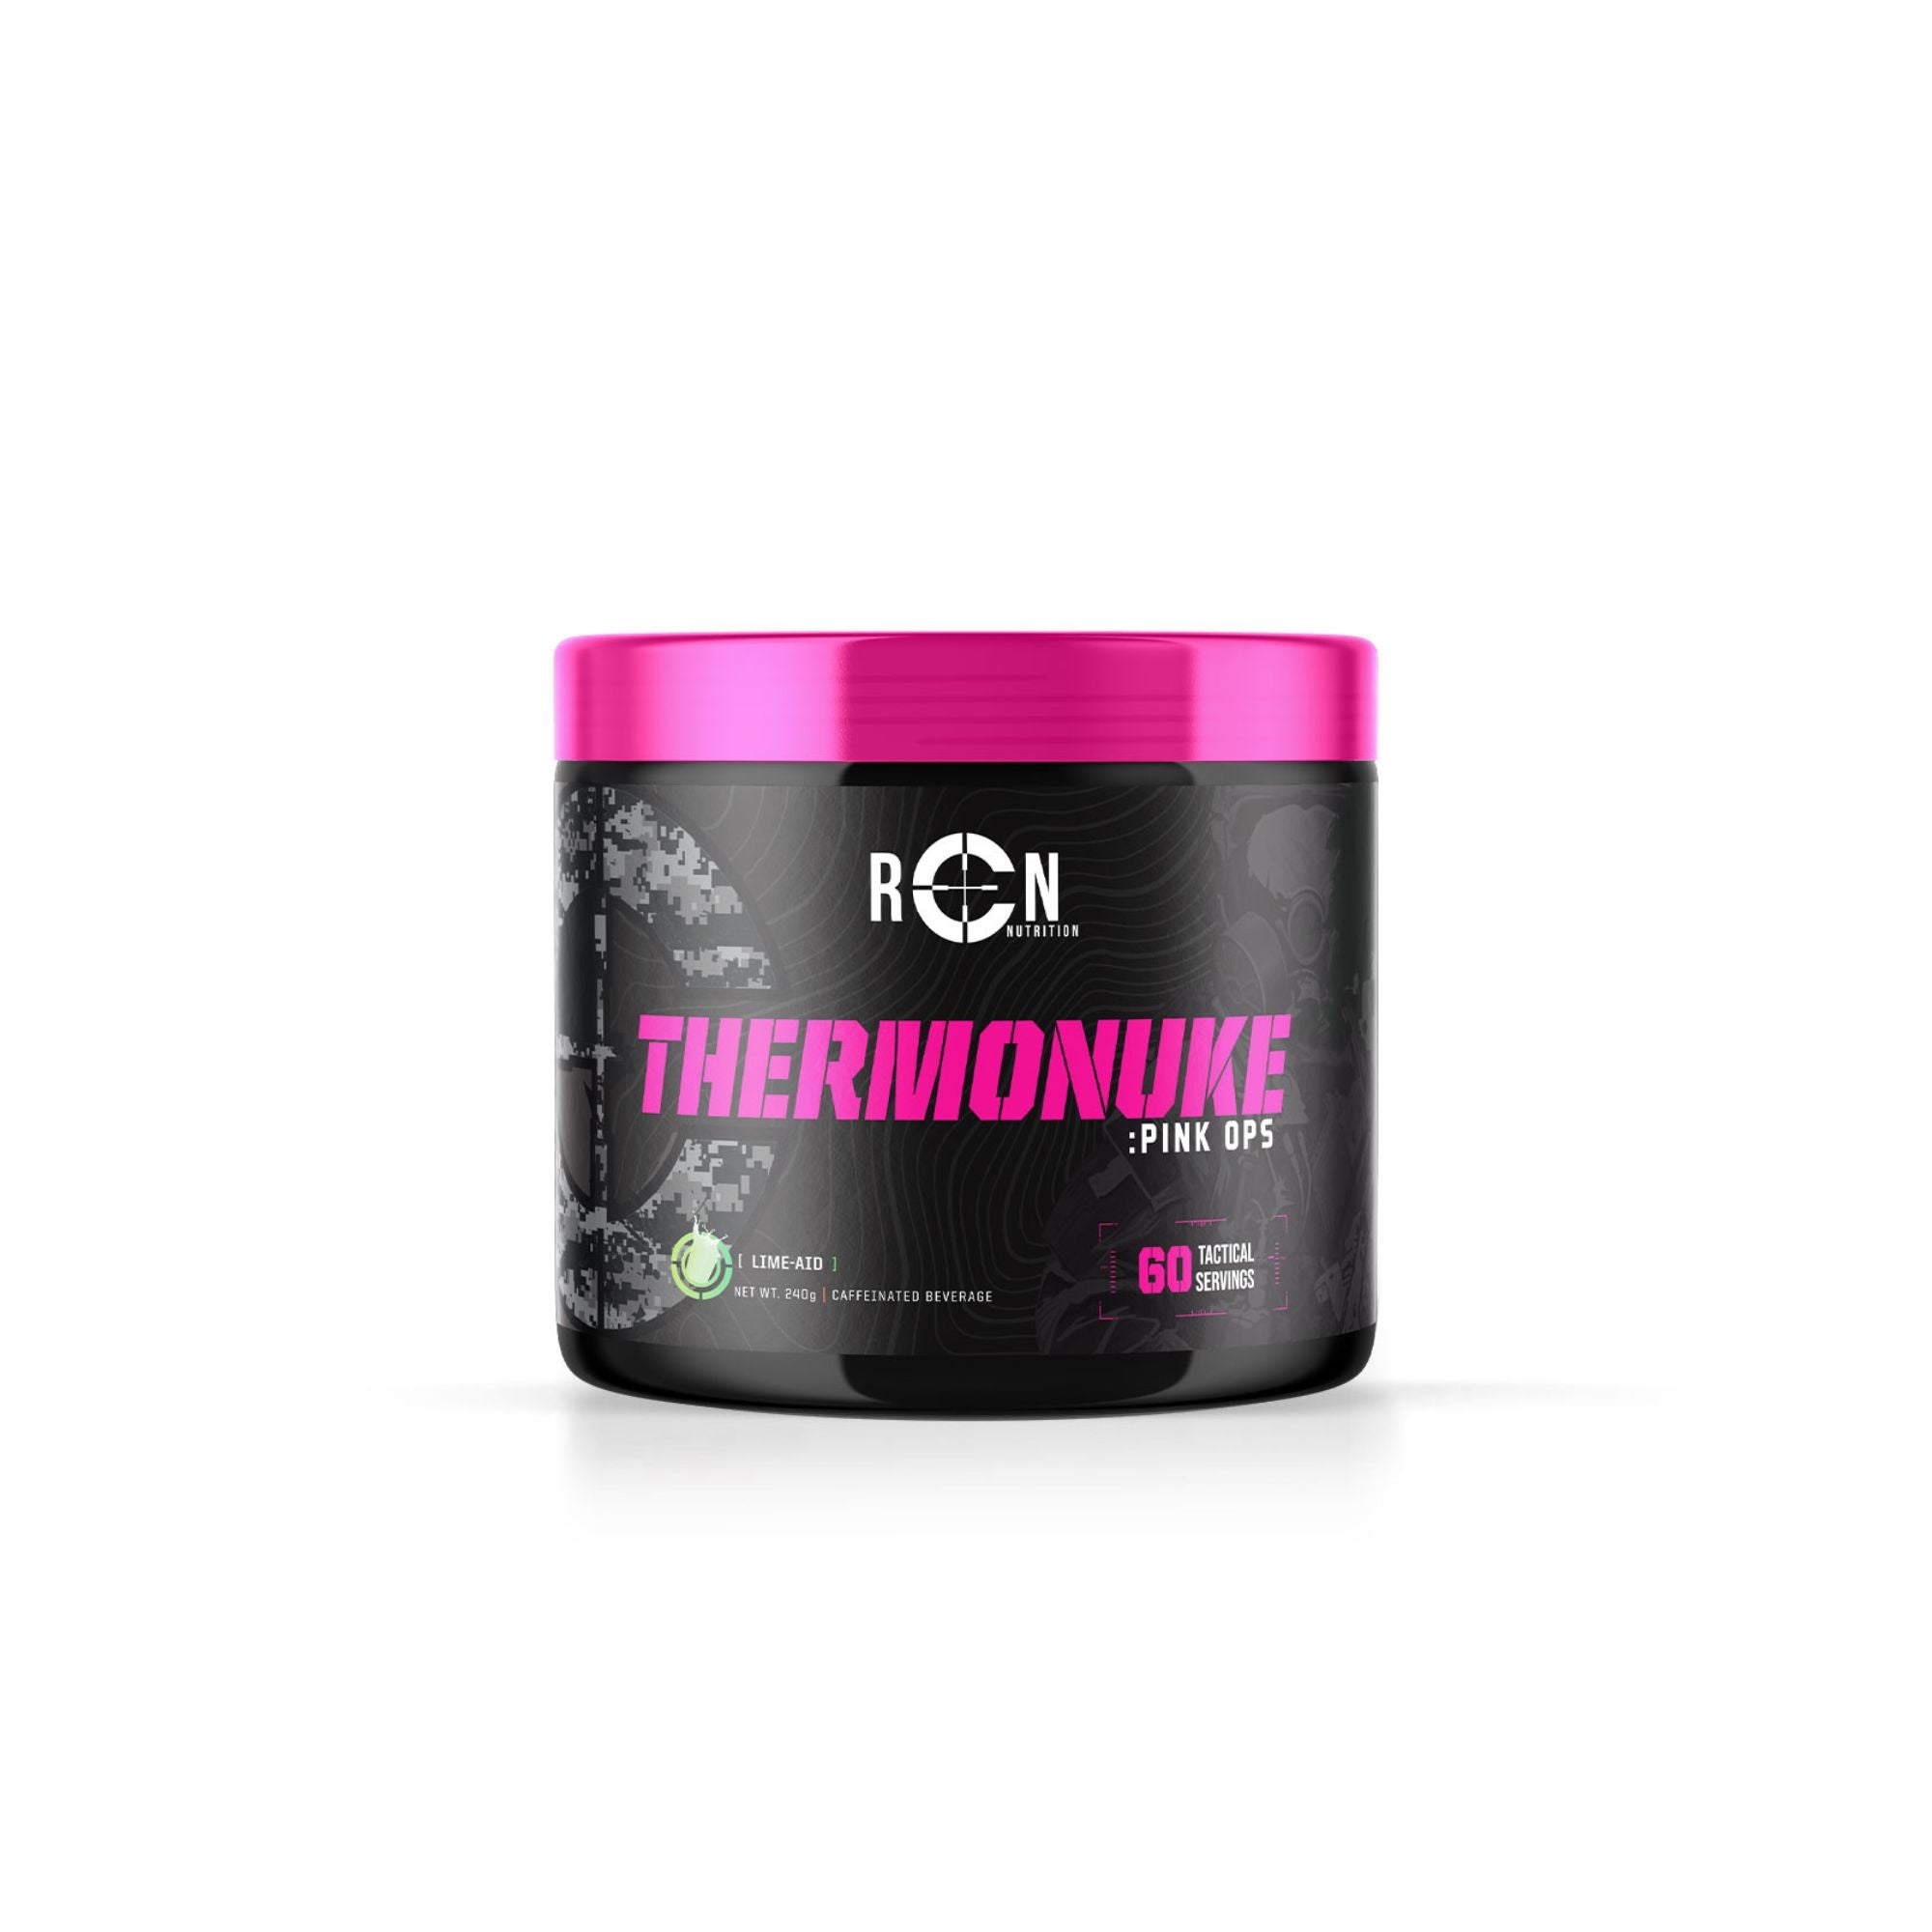 Thermonuke Pink Ops Lime Aid